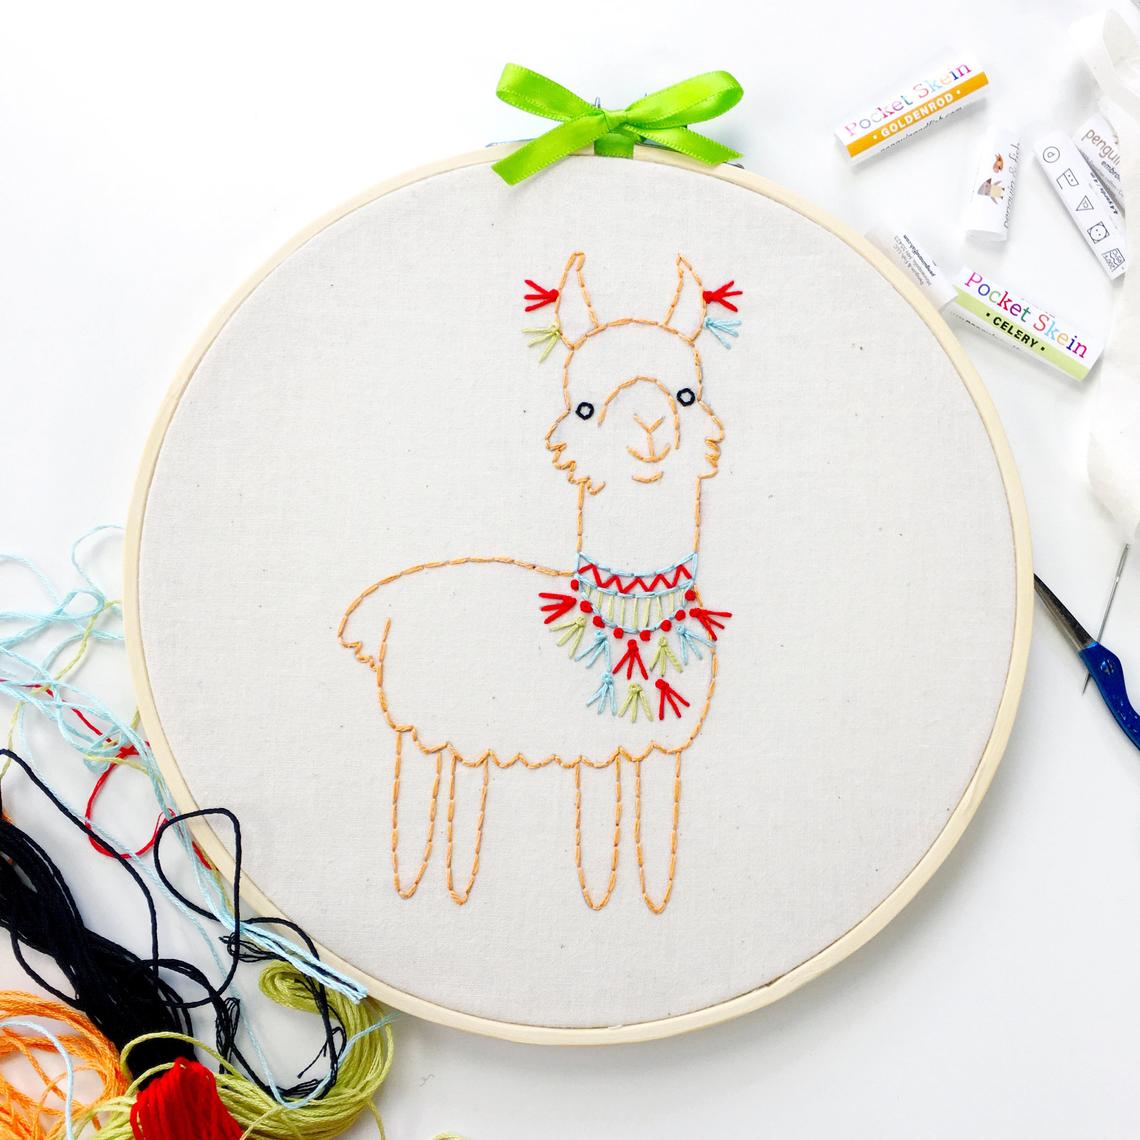 Llama embroidery kit shown in an 8-inch hoop